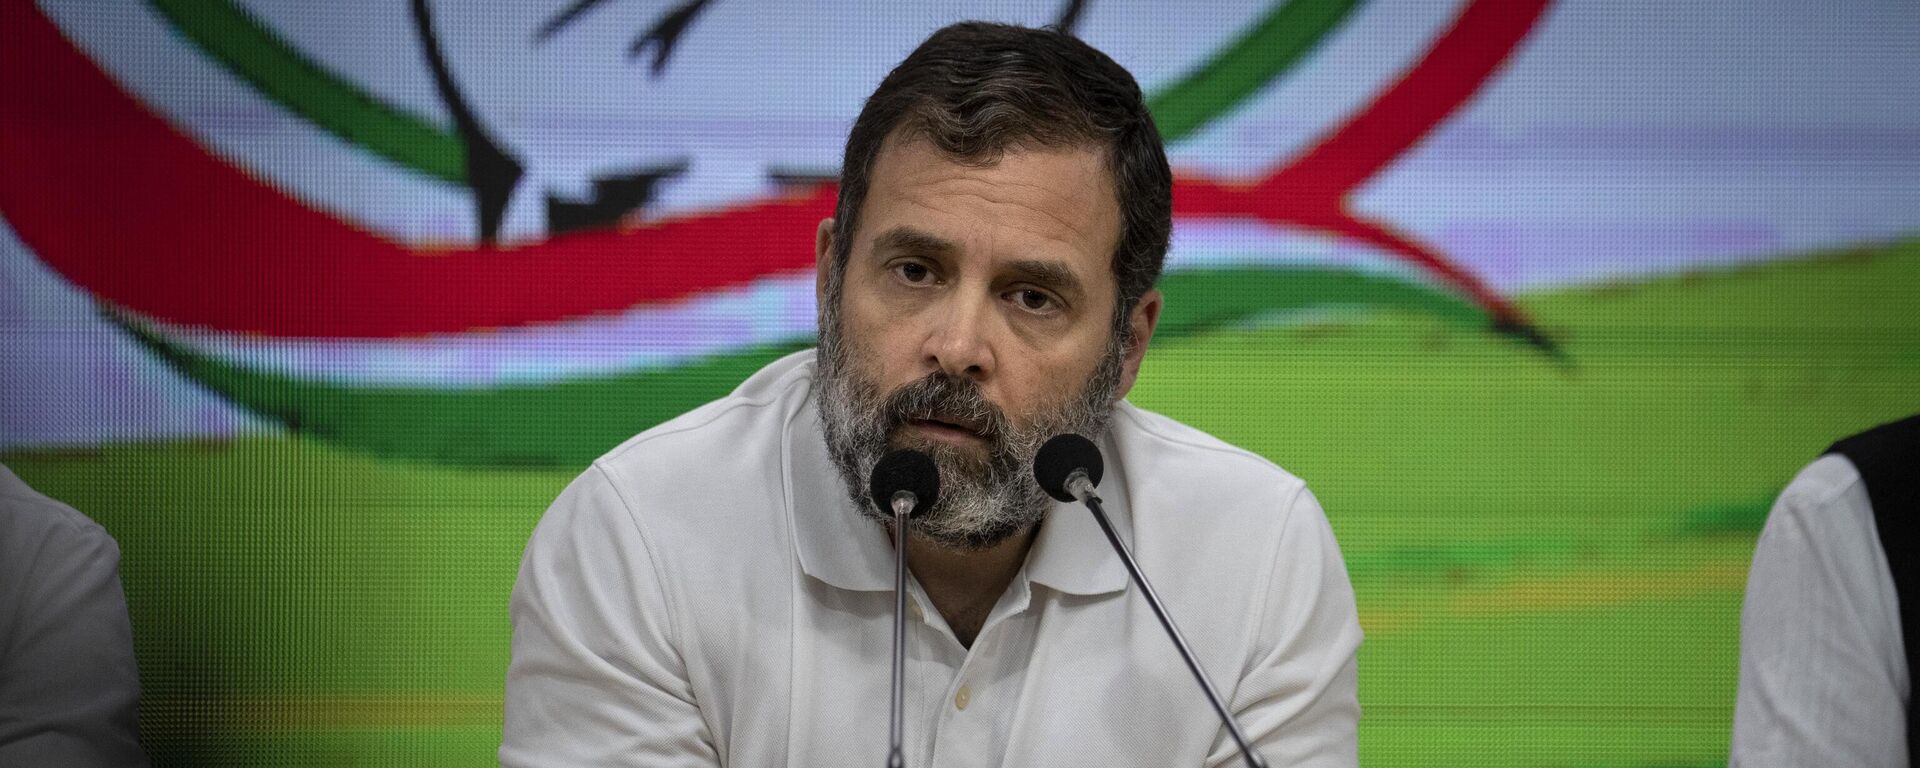 Indian opposition leader Rahul Gandhi addresses a press conference after he was expelled from parliament Friday, a day after a court convicted him of defamation and sentenced him to two years in prison for mocking the surname Modi in an election speech, in New Delhi, India, Saturday, March 25, 2023. - Sputnik India, 1920, 20.04.2023